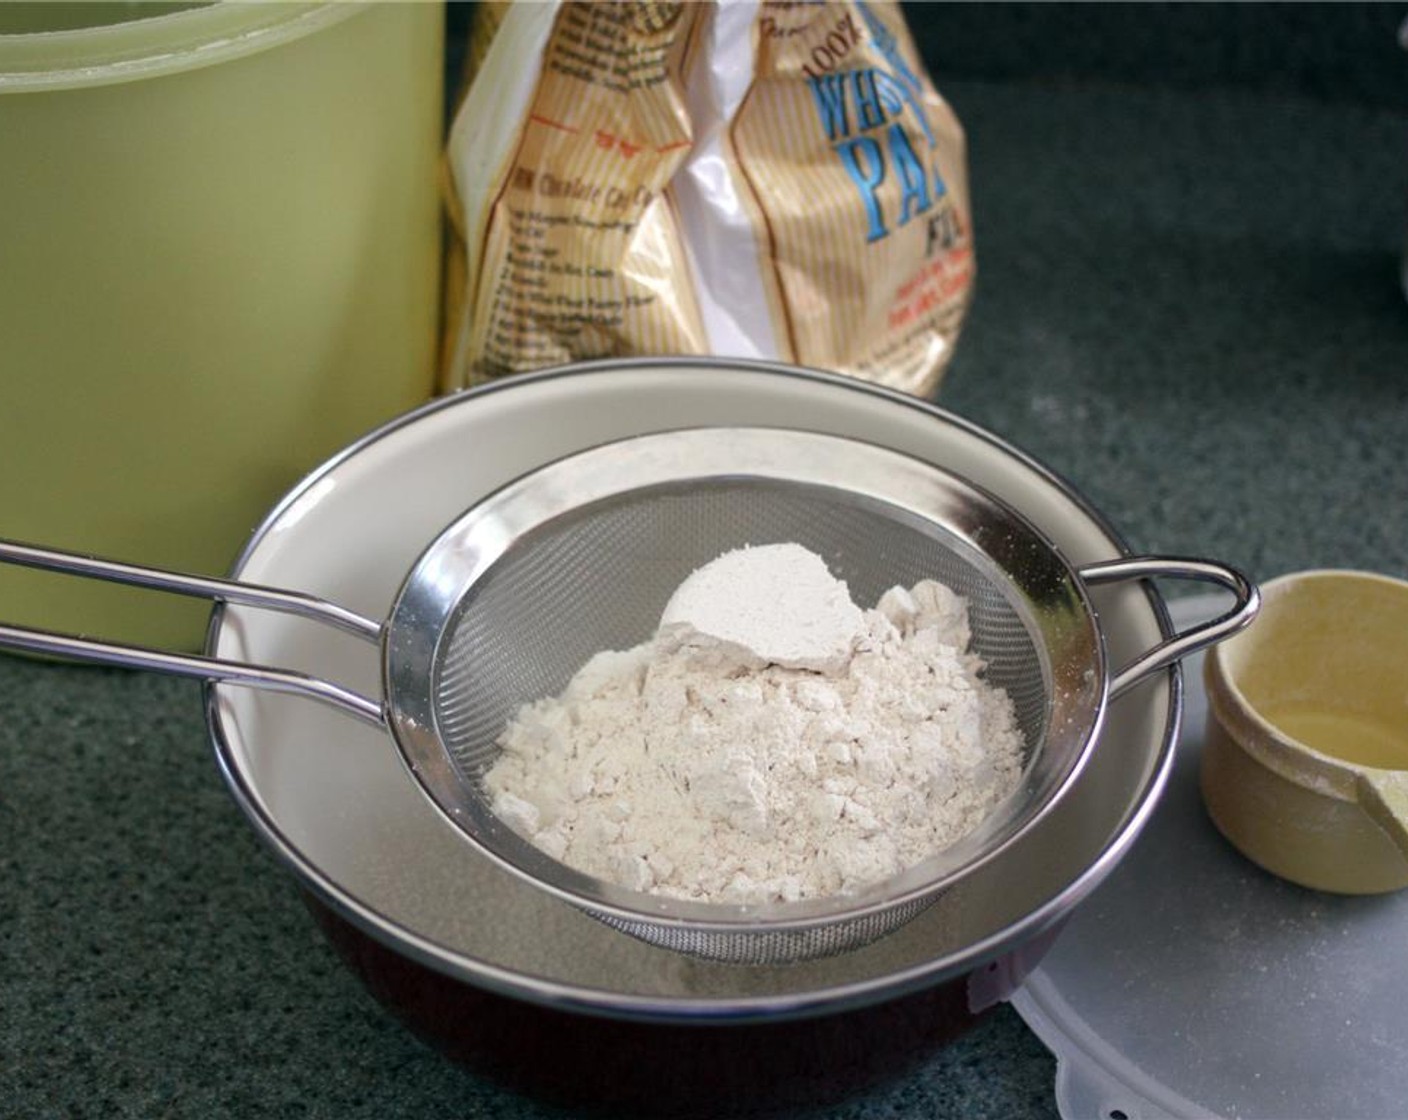 step 3 Sift the All-Purpose Flour (1/2 cup) and Whole Wheat Pastry Flour (1/2 cup) into a medium bowl using a mesh strainer or sifter.